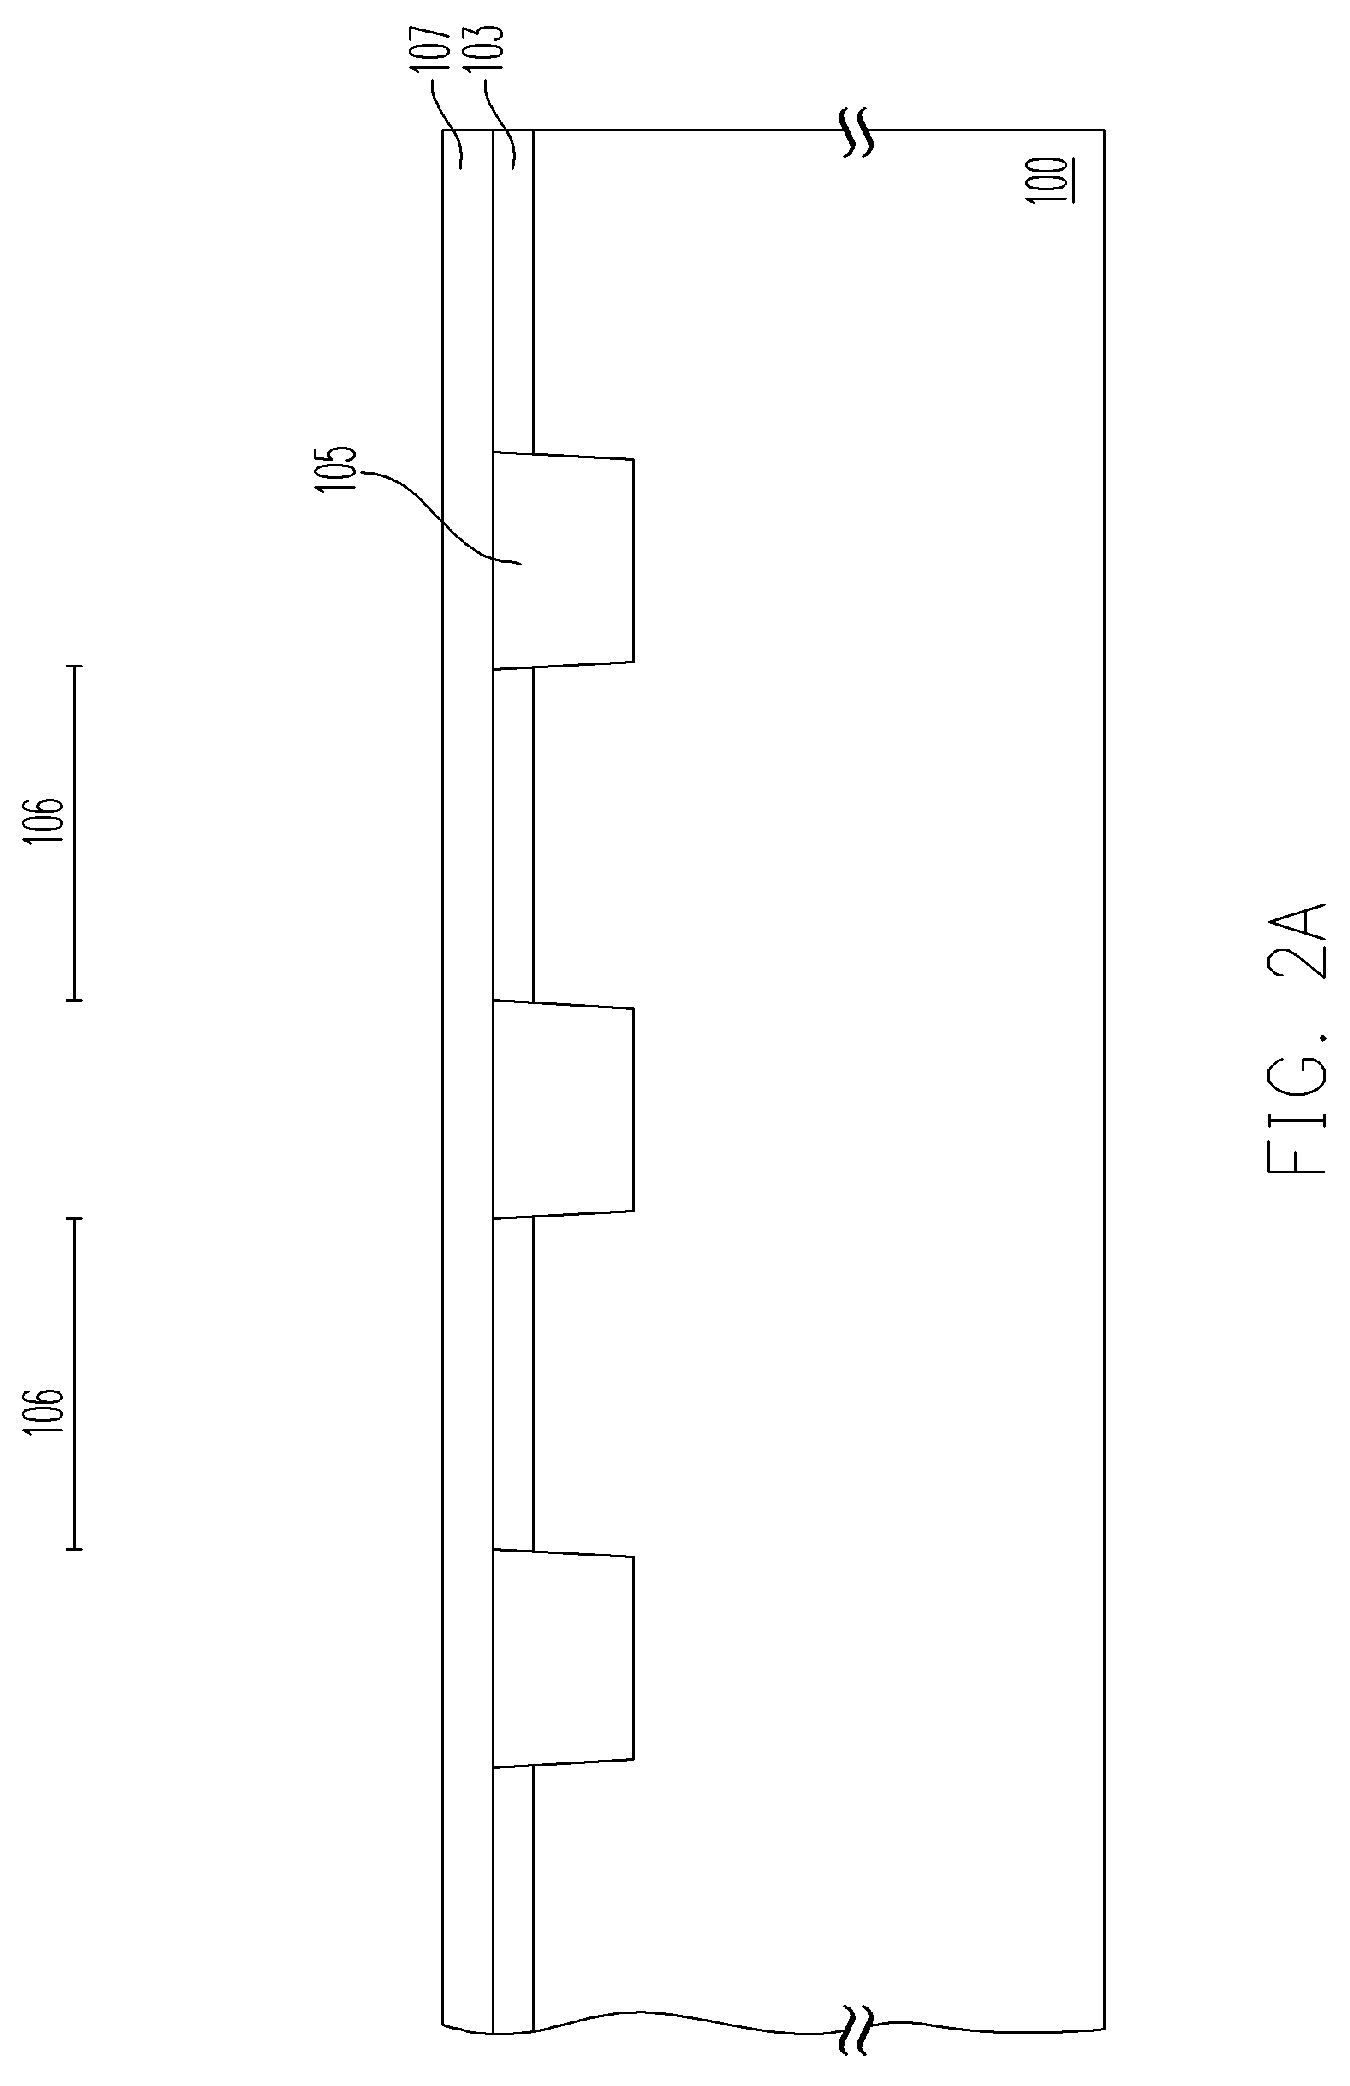 Pick-up structure for DRAM capacitors